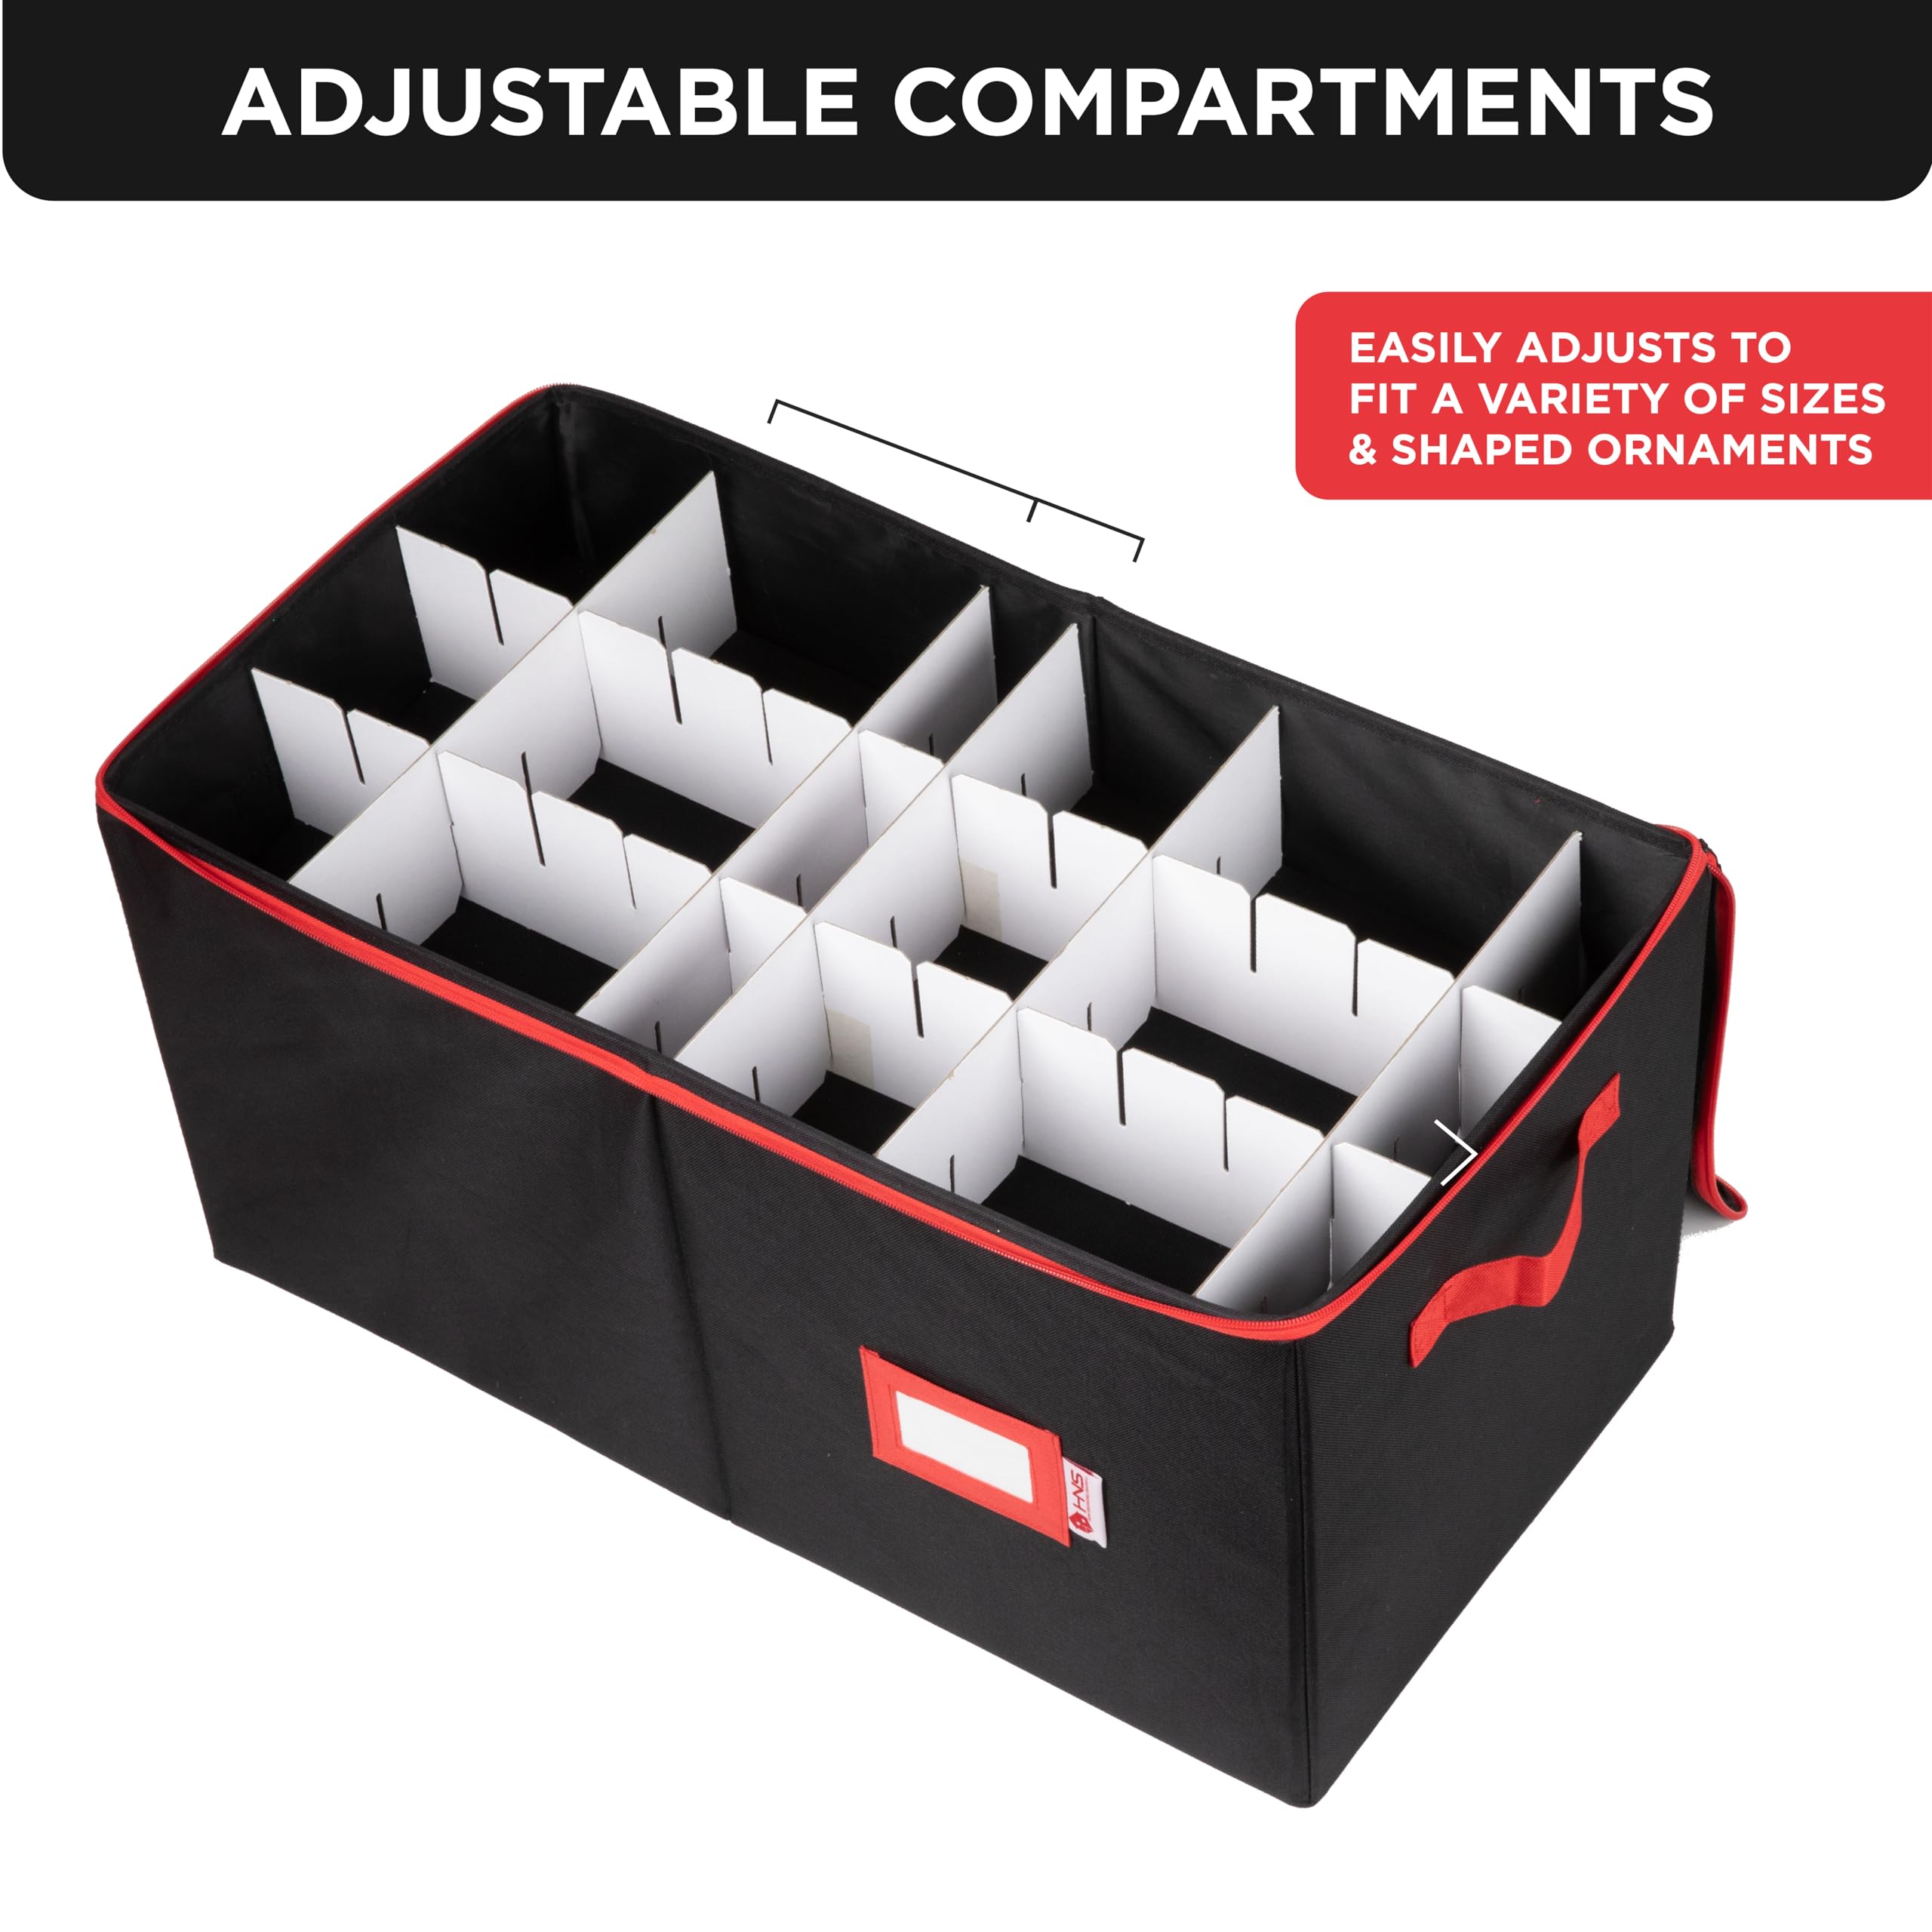 Christmas Ornament Storage Container with Dividers -Box Stores Up to 54-4" Ornaments, Zippered, Convenient, Adjustable, Heavy Duty 600D, Organizer Bin to Protect and Store Holiday Décor  - Very Good